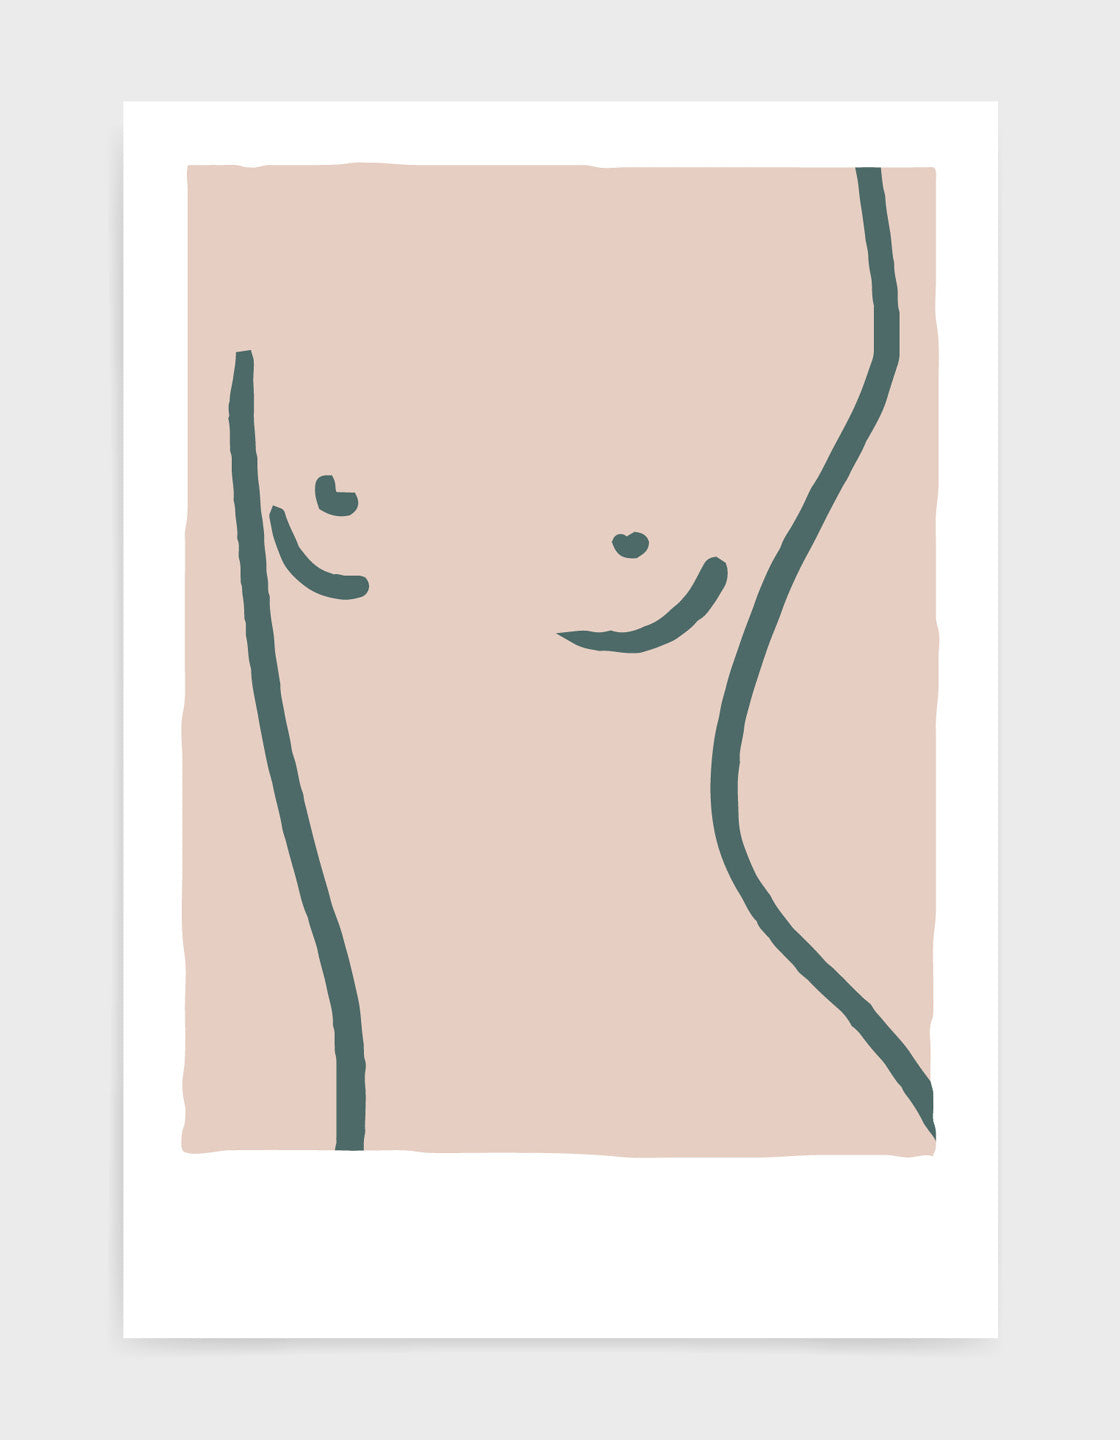 super simpl line drawing in grey against a pink background of a woman's torso and breasts